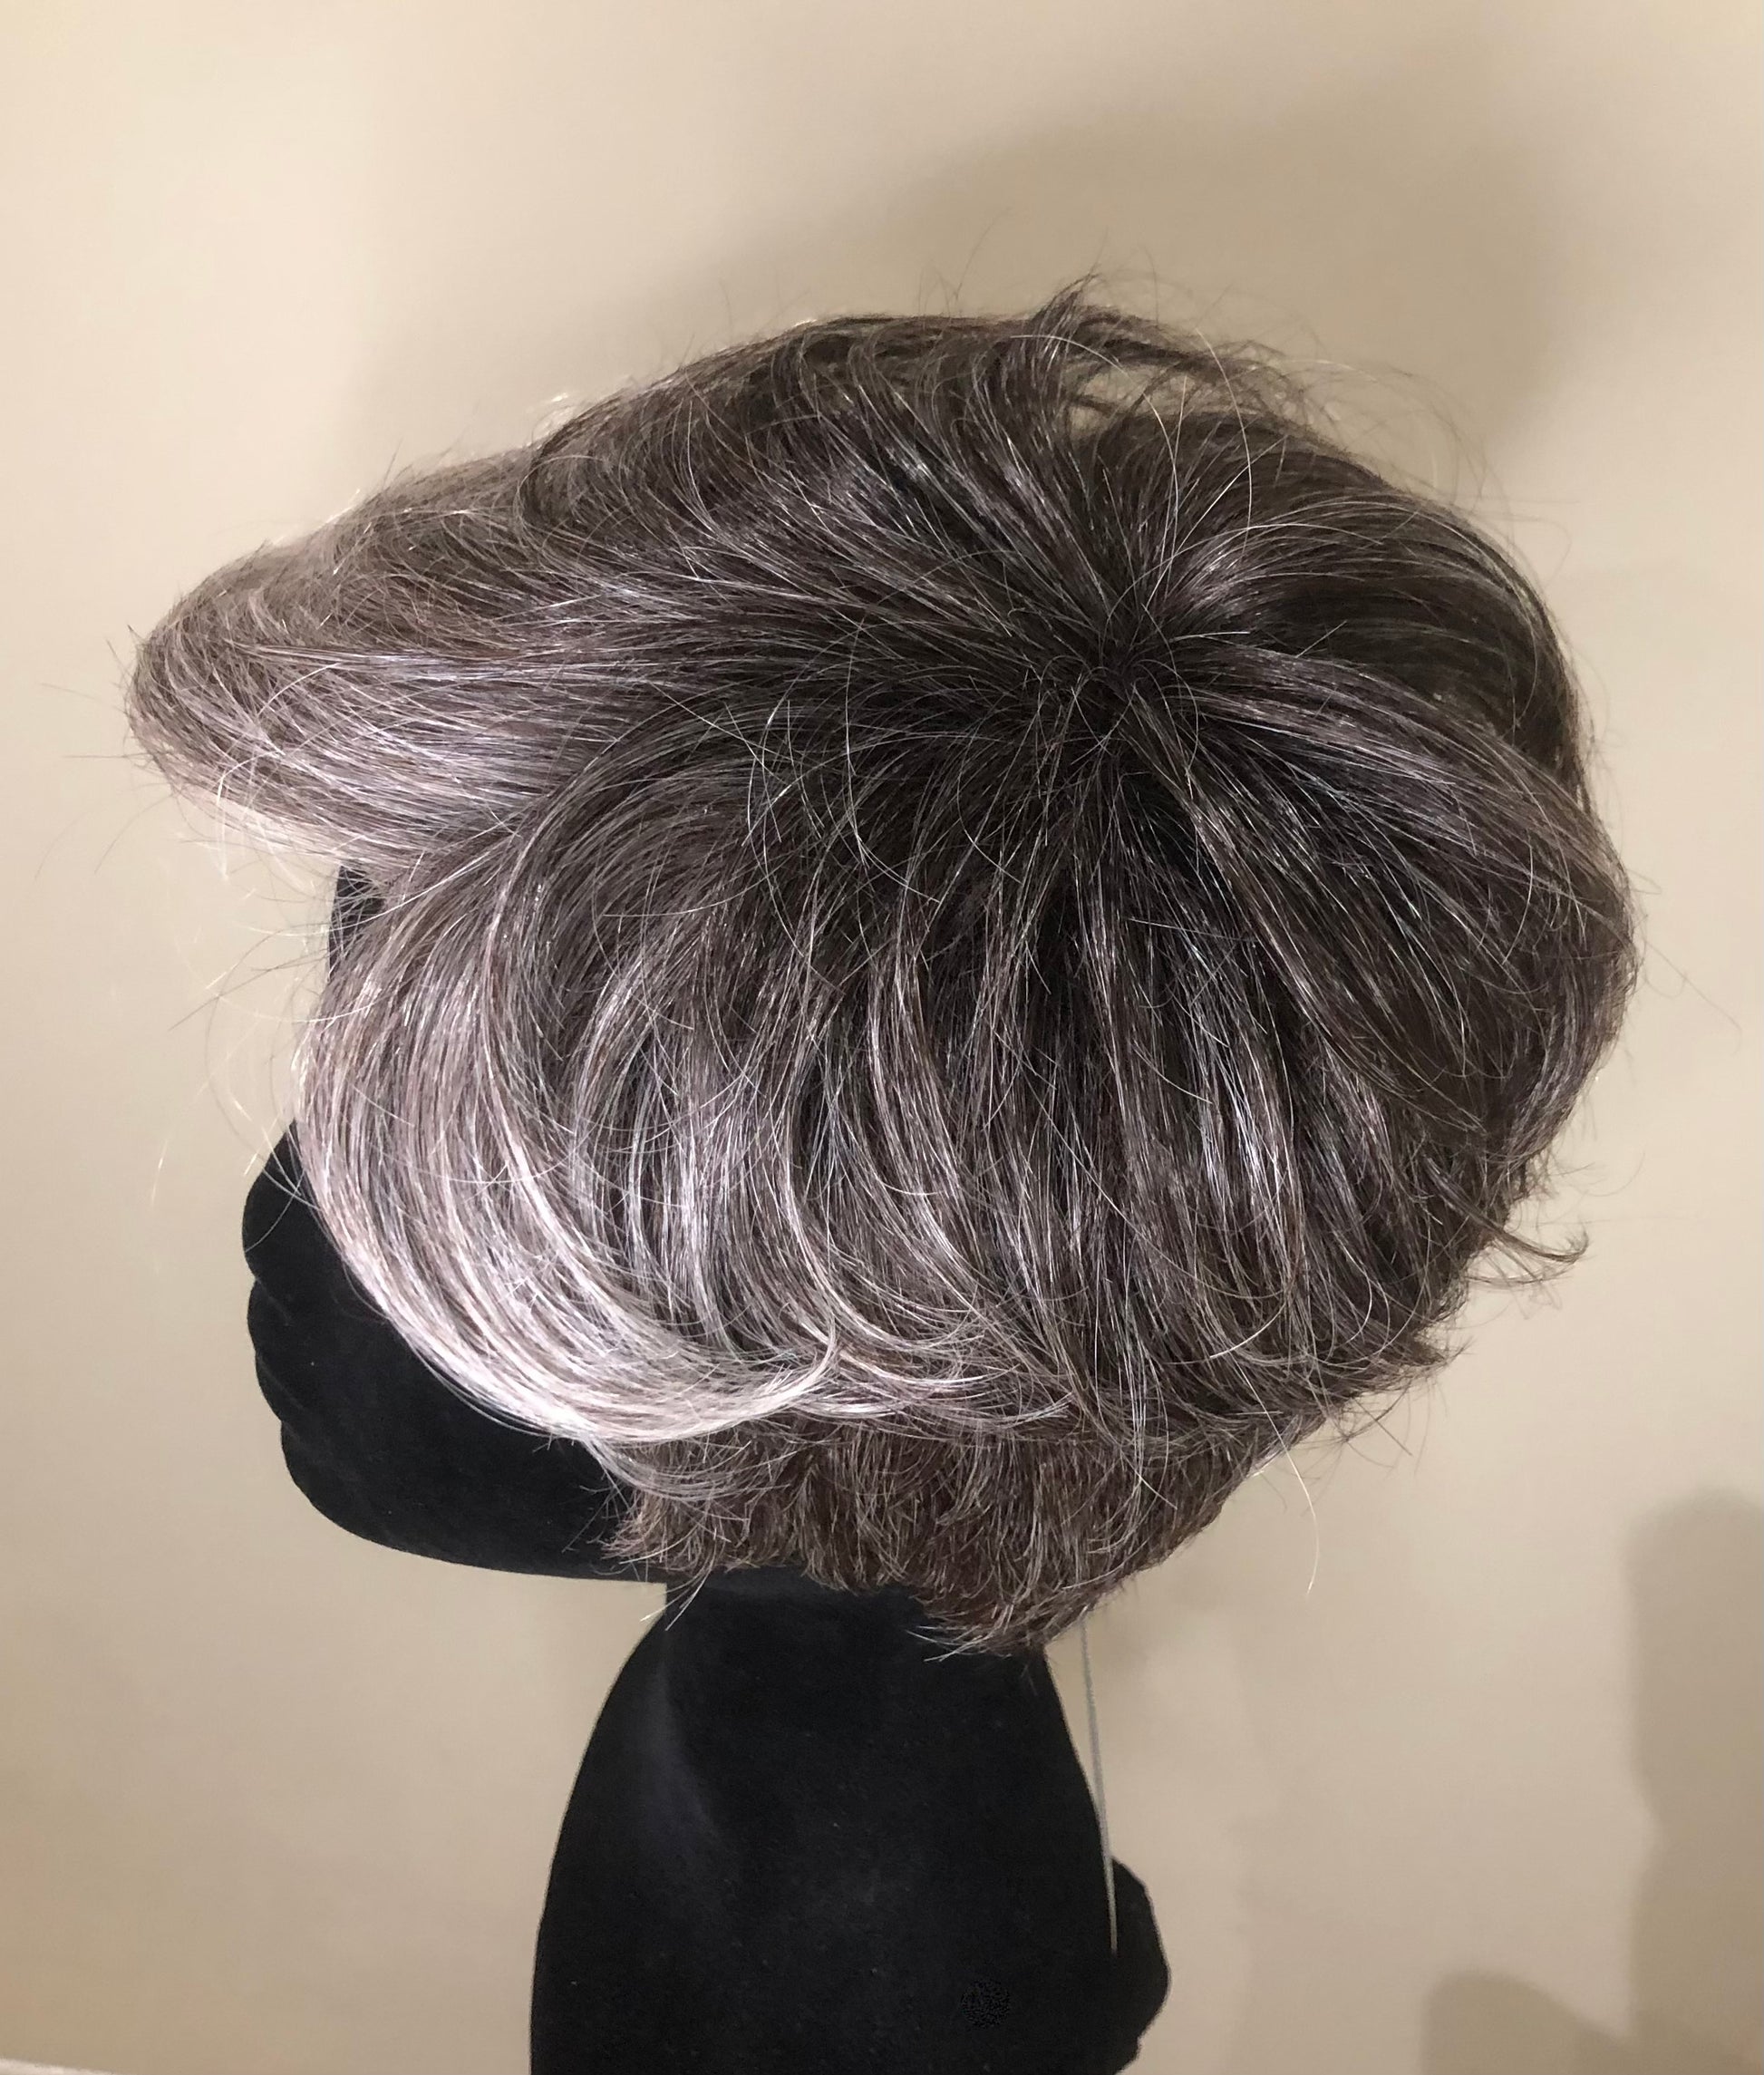 Encore Prime Power Wig in Salt and pepper